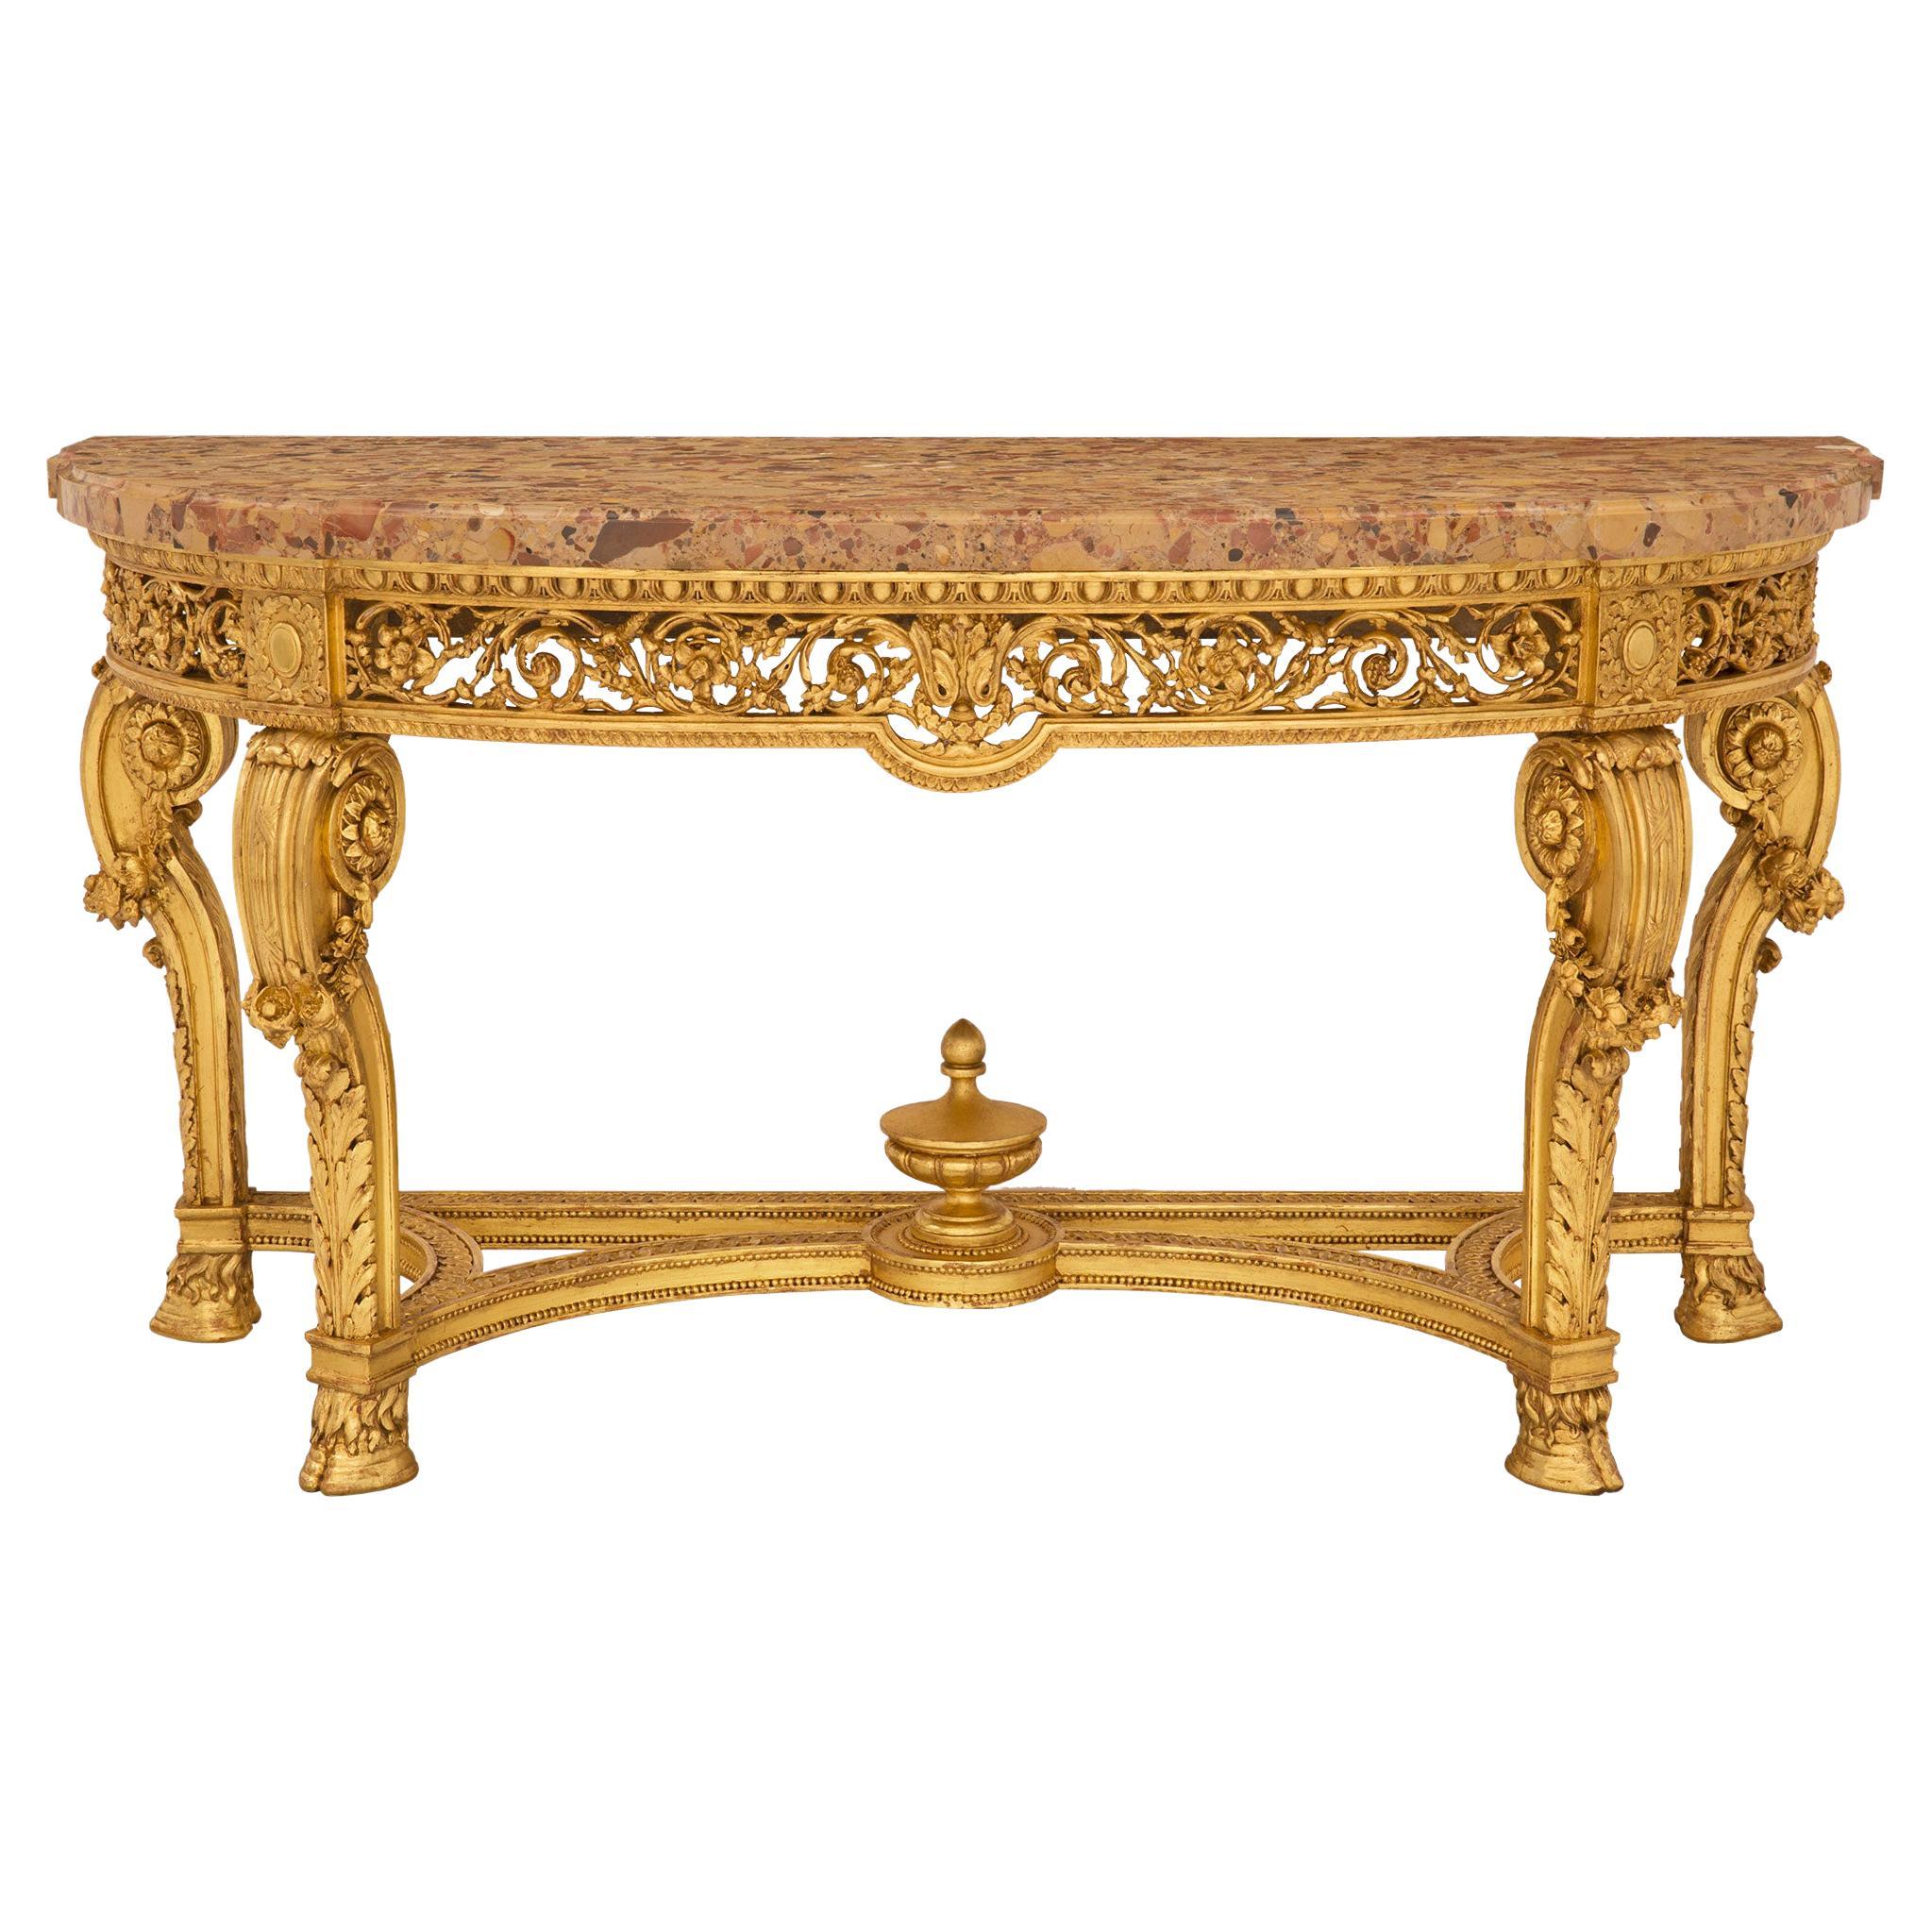 French 19th Century Louis XVI Style Giltwood and Brèche D’Alep Marble Console For Sale